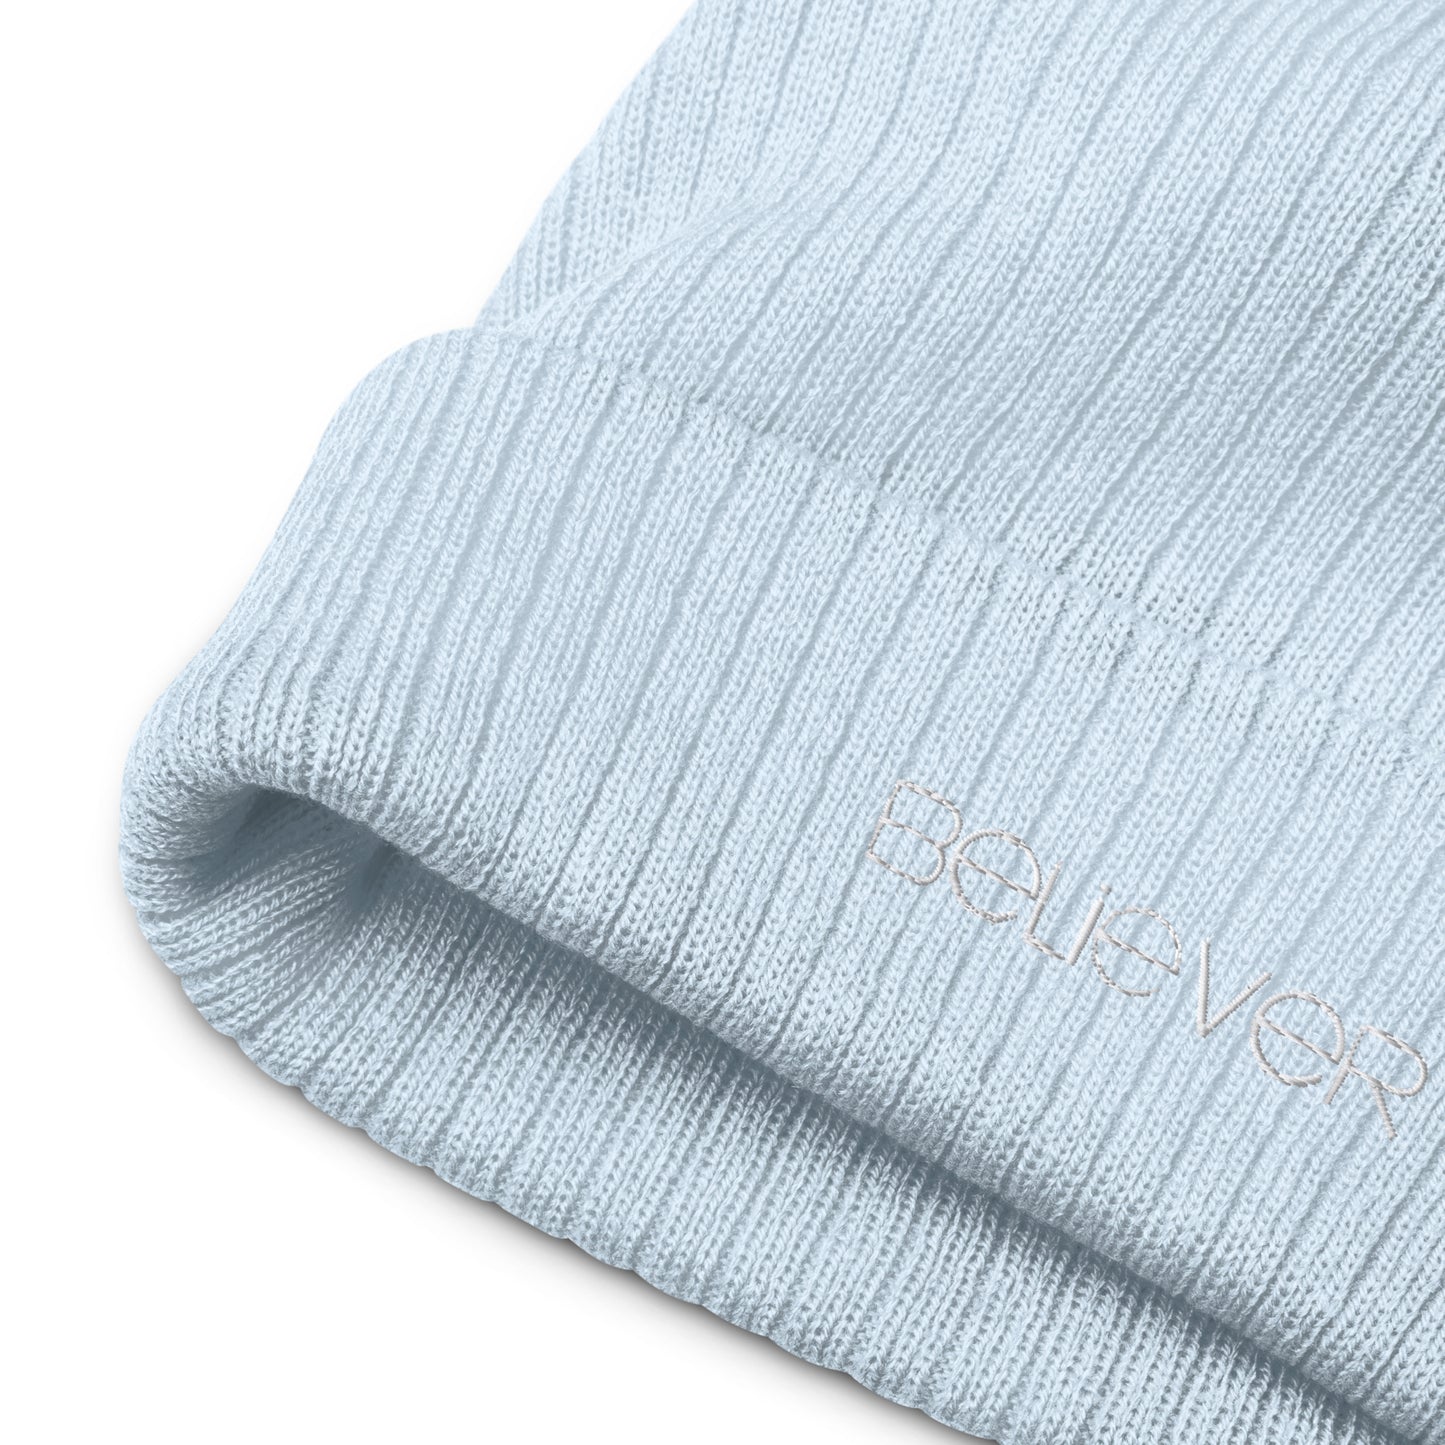 "BELIEVER" Ribbed Knit Beanie